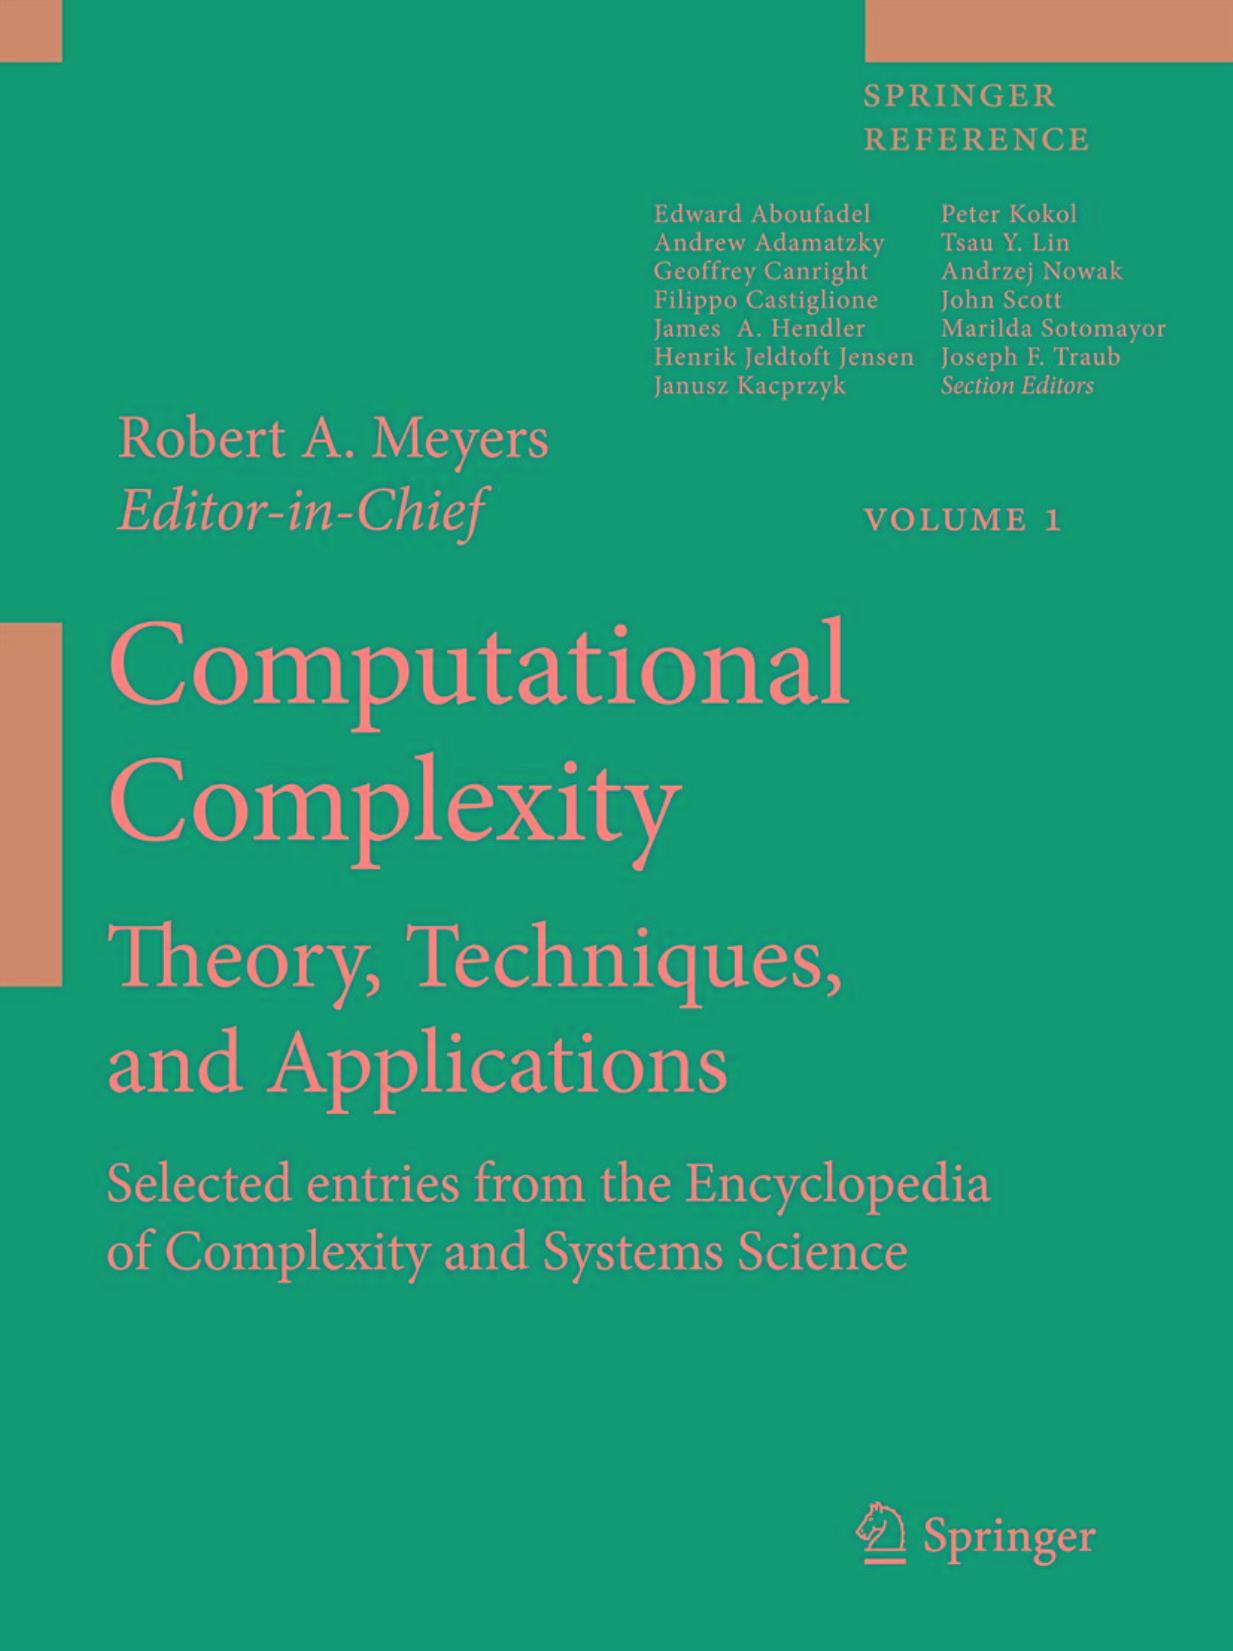 Computational complexity selected entries from the Encyclopedia of computational complexity and systems science